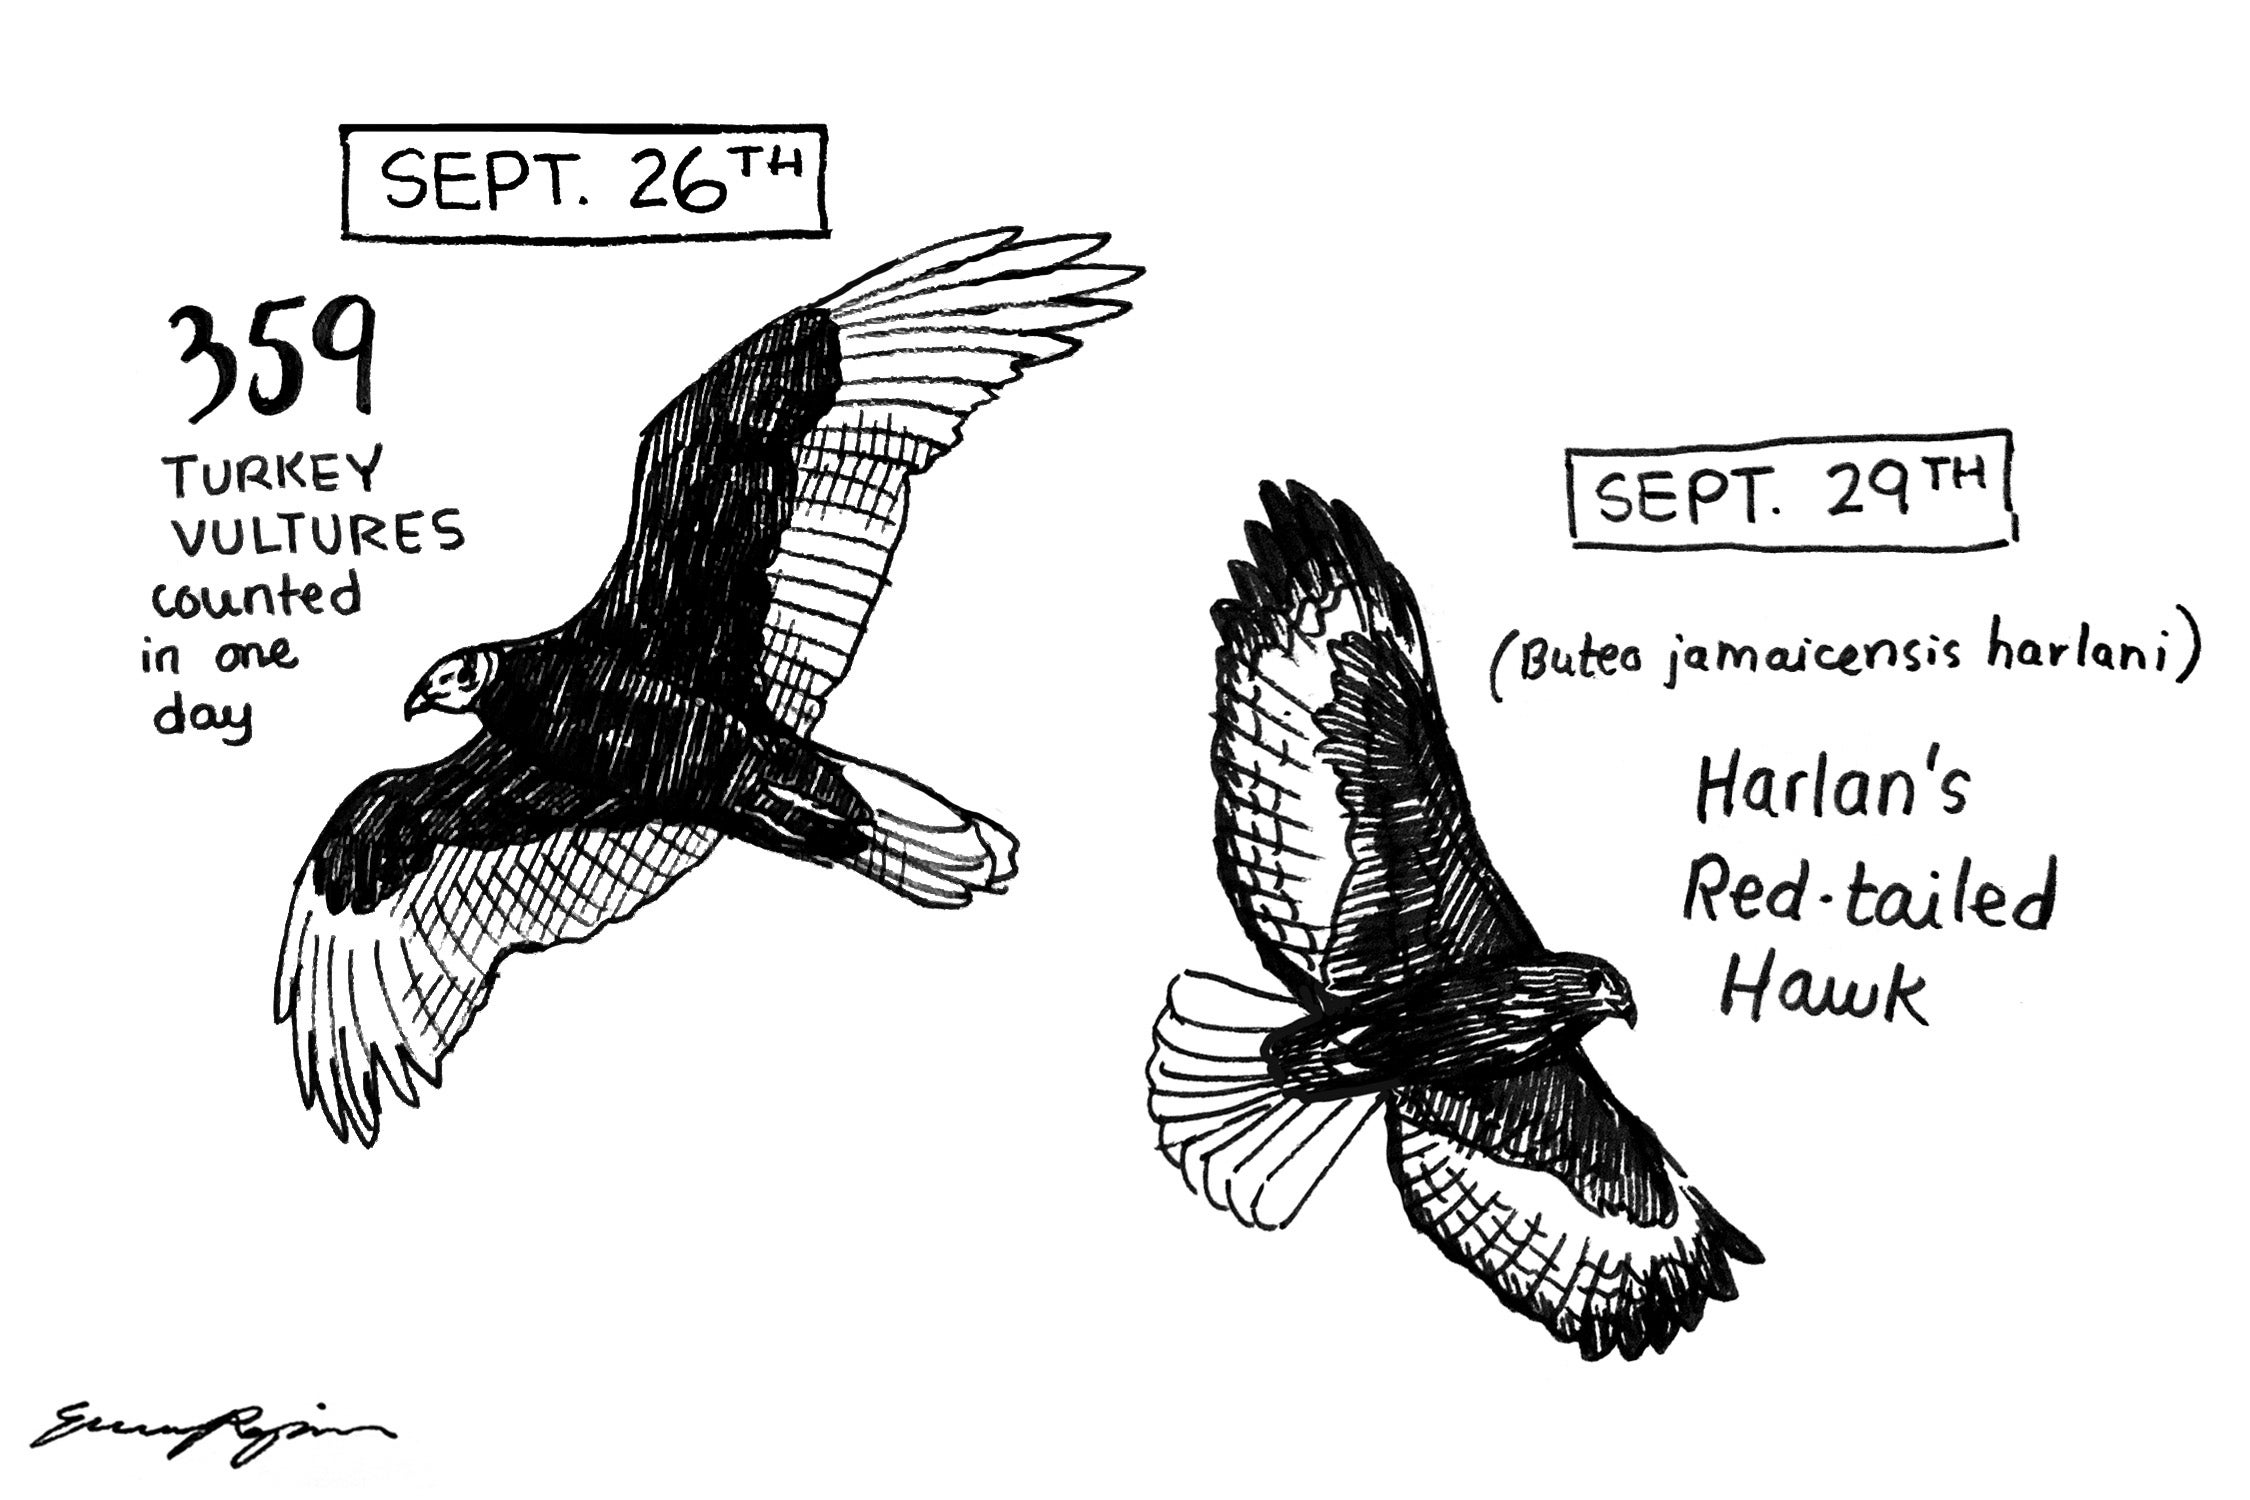 sketch of a turkey vulture and a Harlan's red-tailed hawk